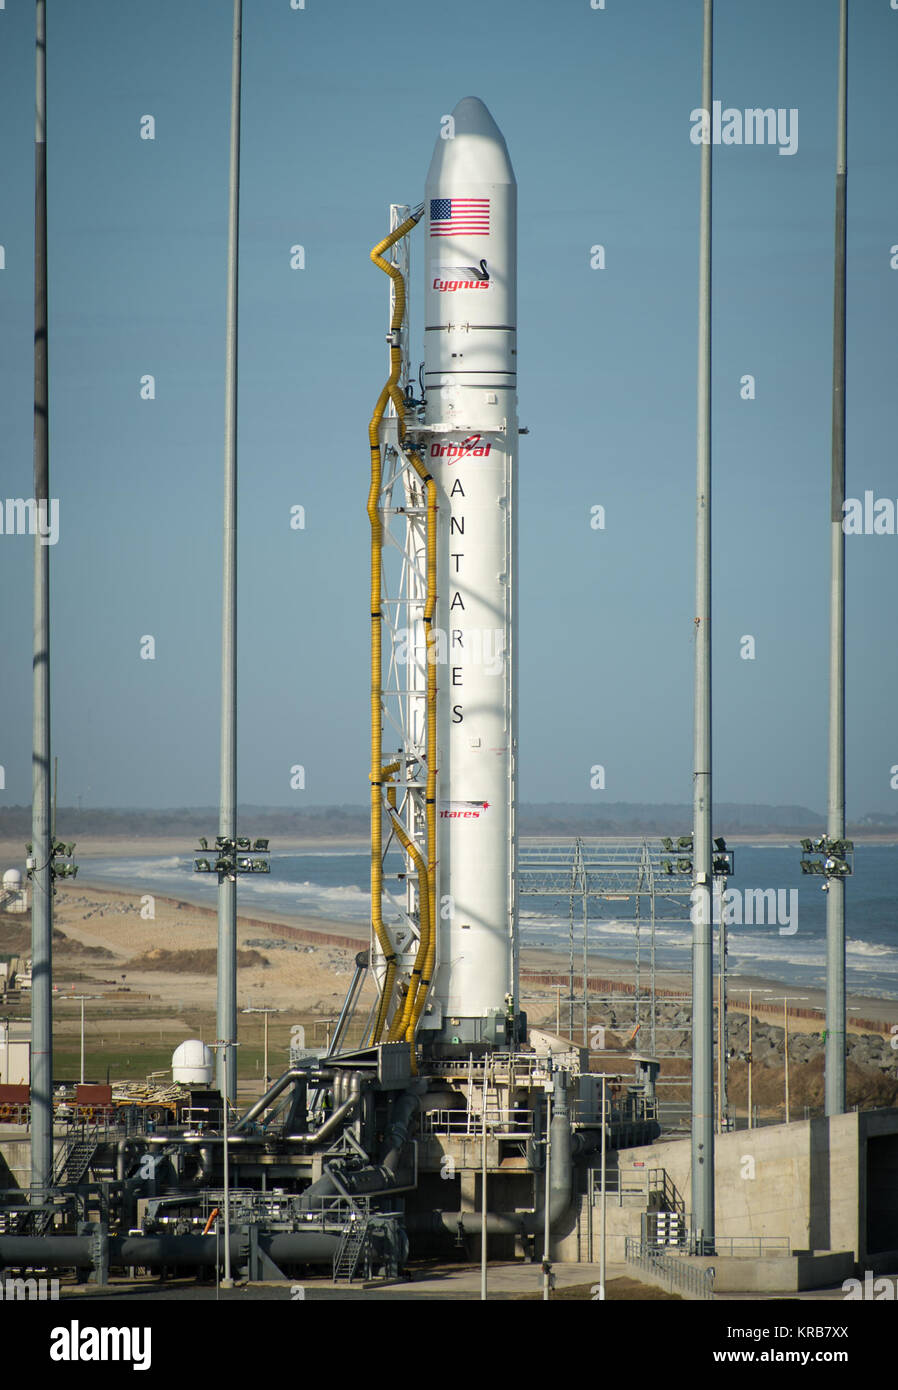 The Orbital Sciences Corporation Antares rocket is seen on the Mid-Atlantic Regional Spaceport (MARS) Pad-0A at the NASA Wallops Flight Facility, Tuesday, April 16, 2013 in Virginia.  NASA's commercial space partner, Orbital Sciences Corporation, is scheduled to test launch its first Antares on Wednesday, April 17, 2013.  Photo Credit: (NASA/Bill Ingalls) Antares A-ONE vertical Stock Photo